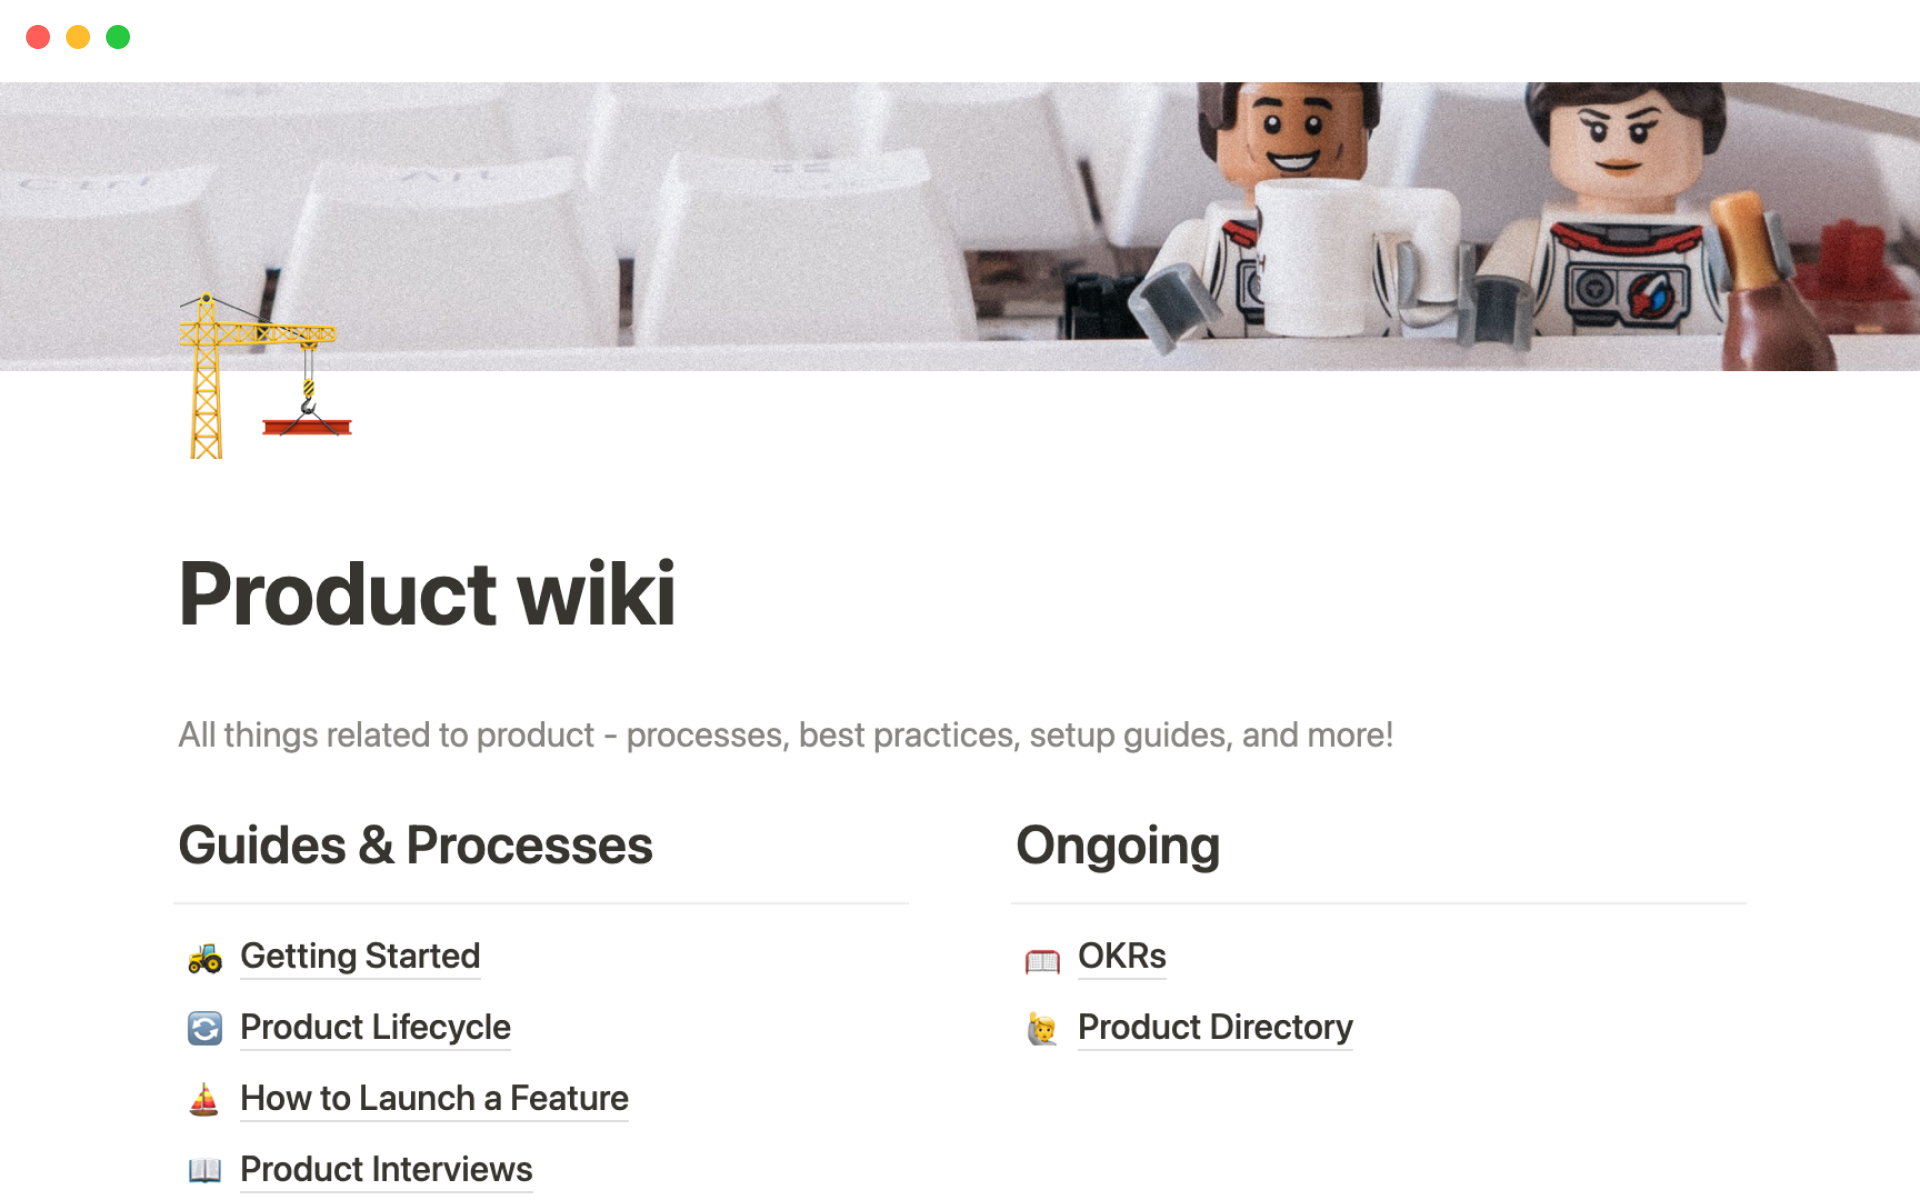 Organize everything related to your product, including processes, best practices, setup guides, and more!